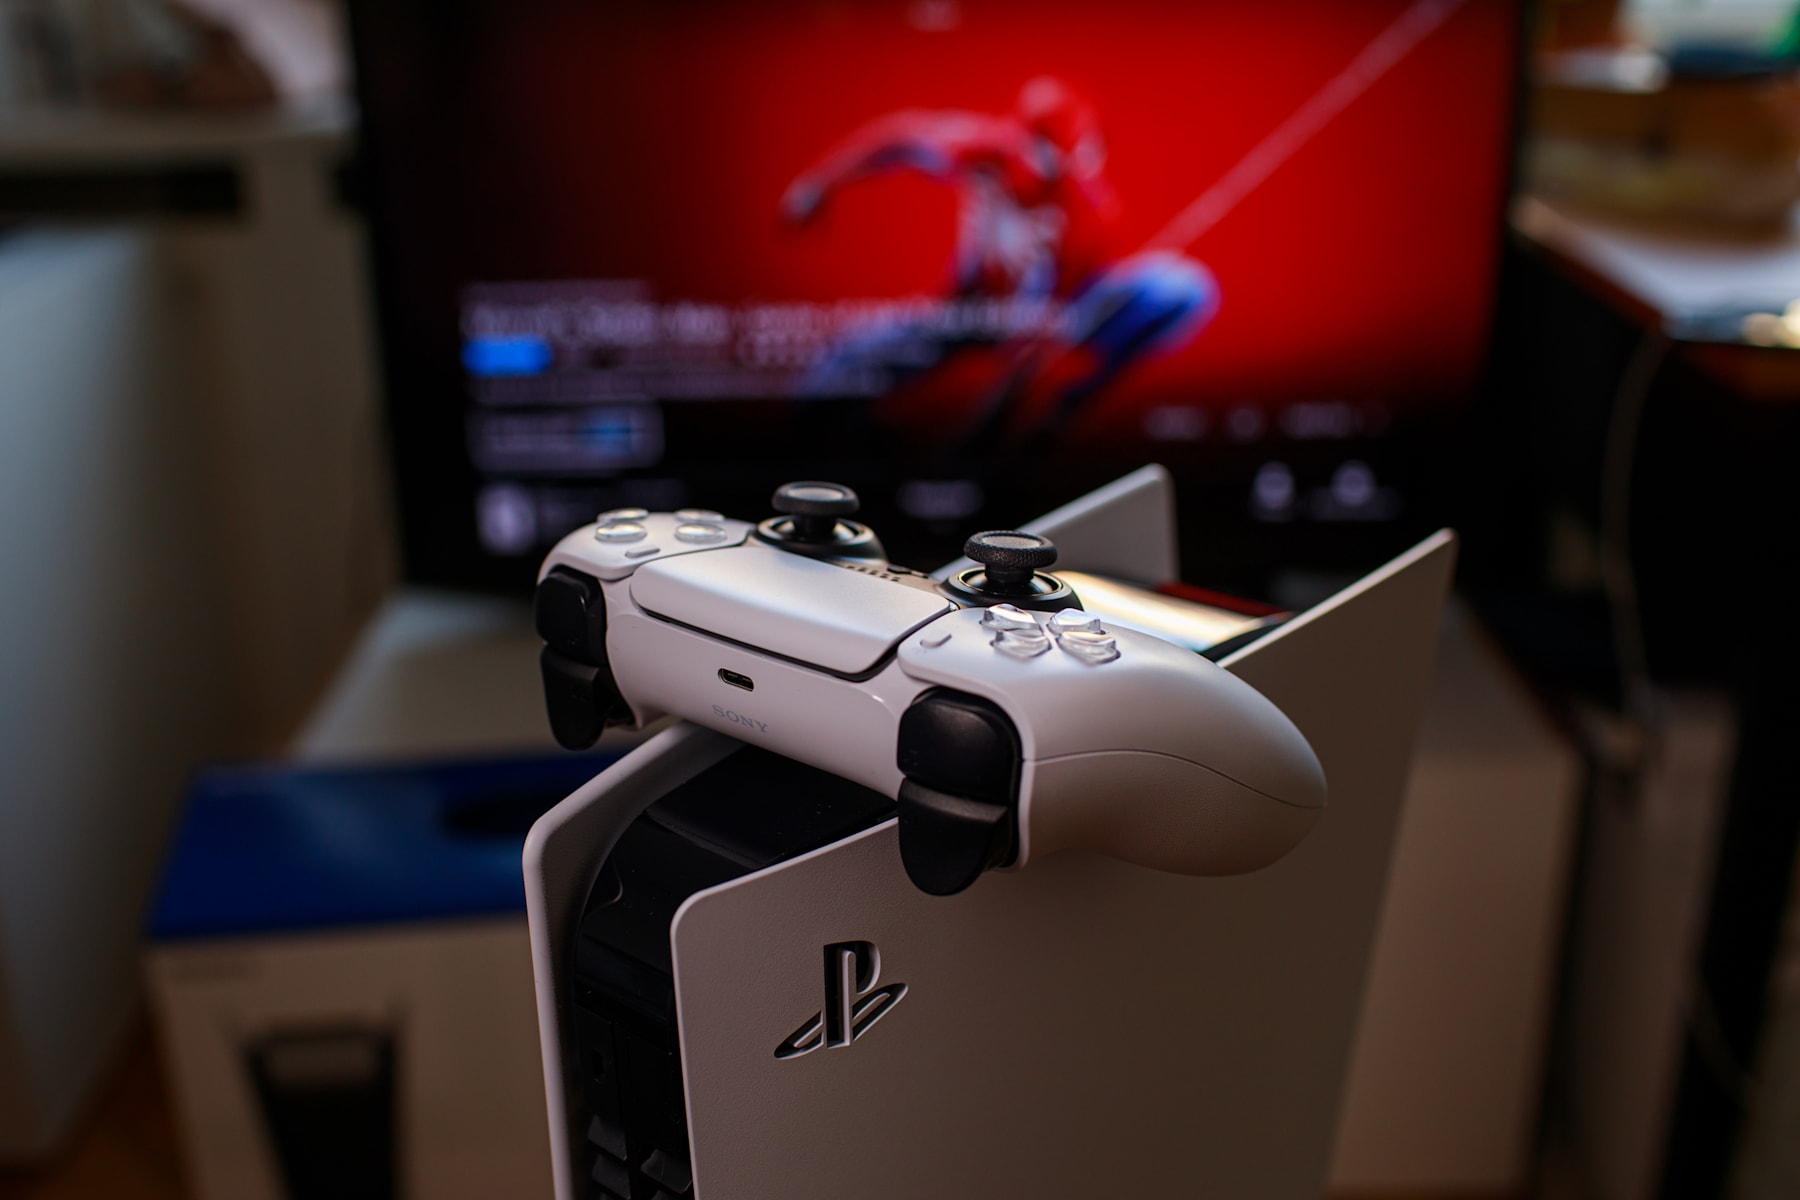 A PlayStation 5 set up to play some video games